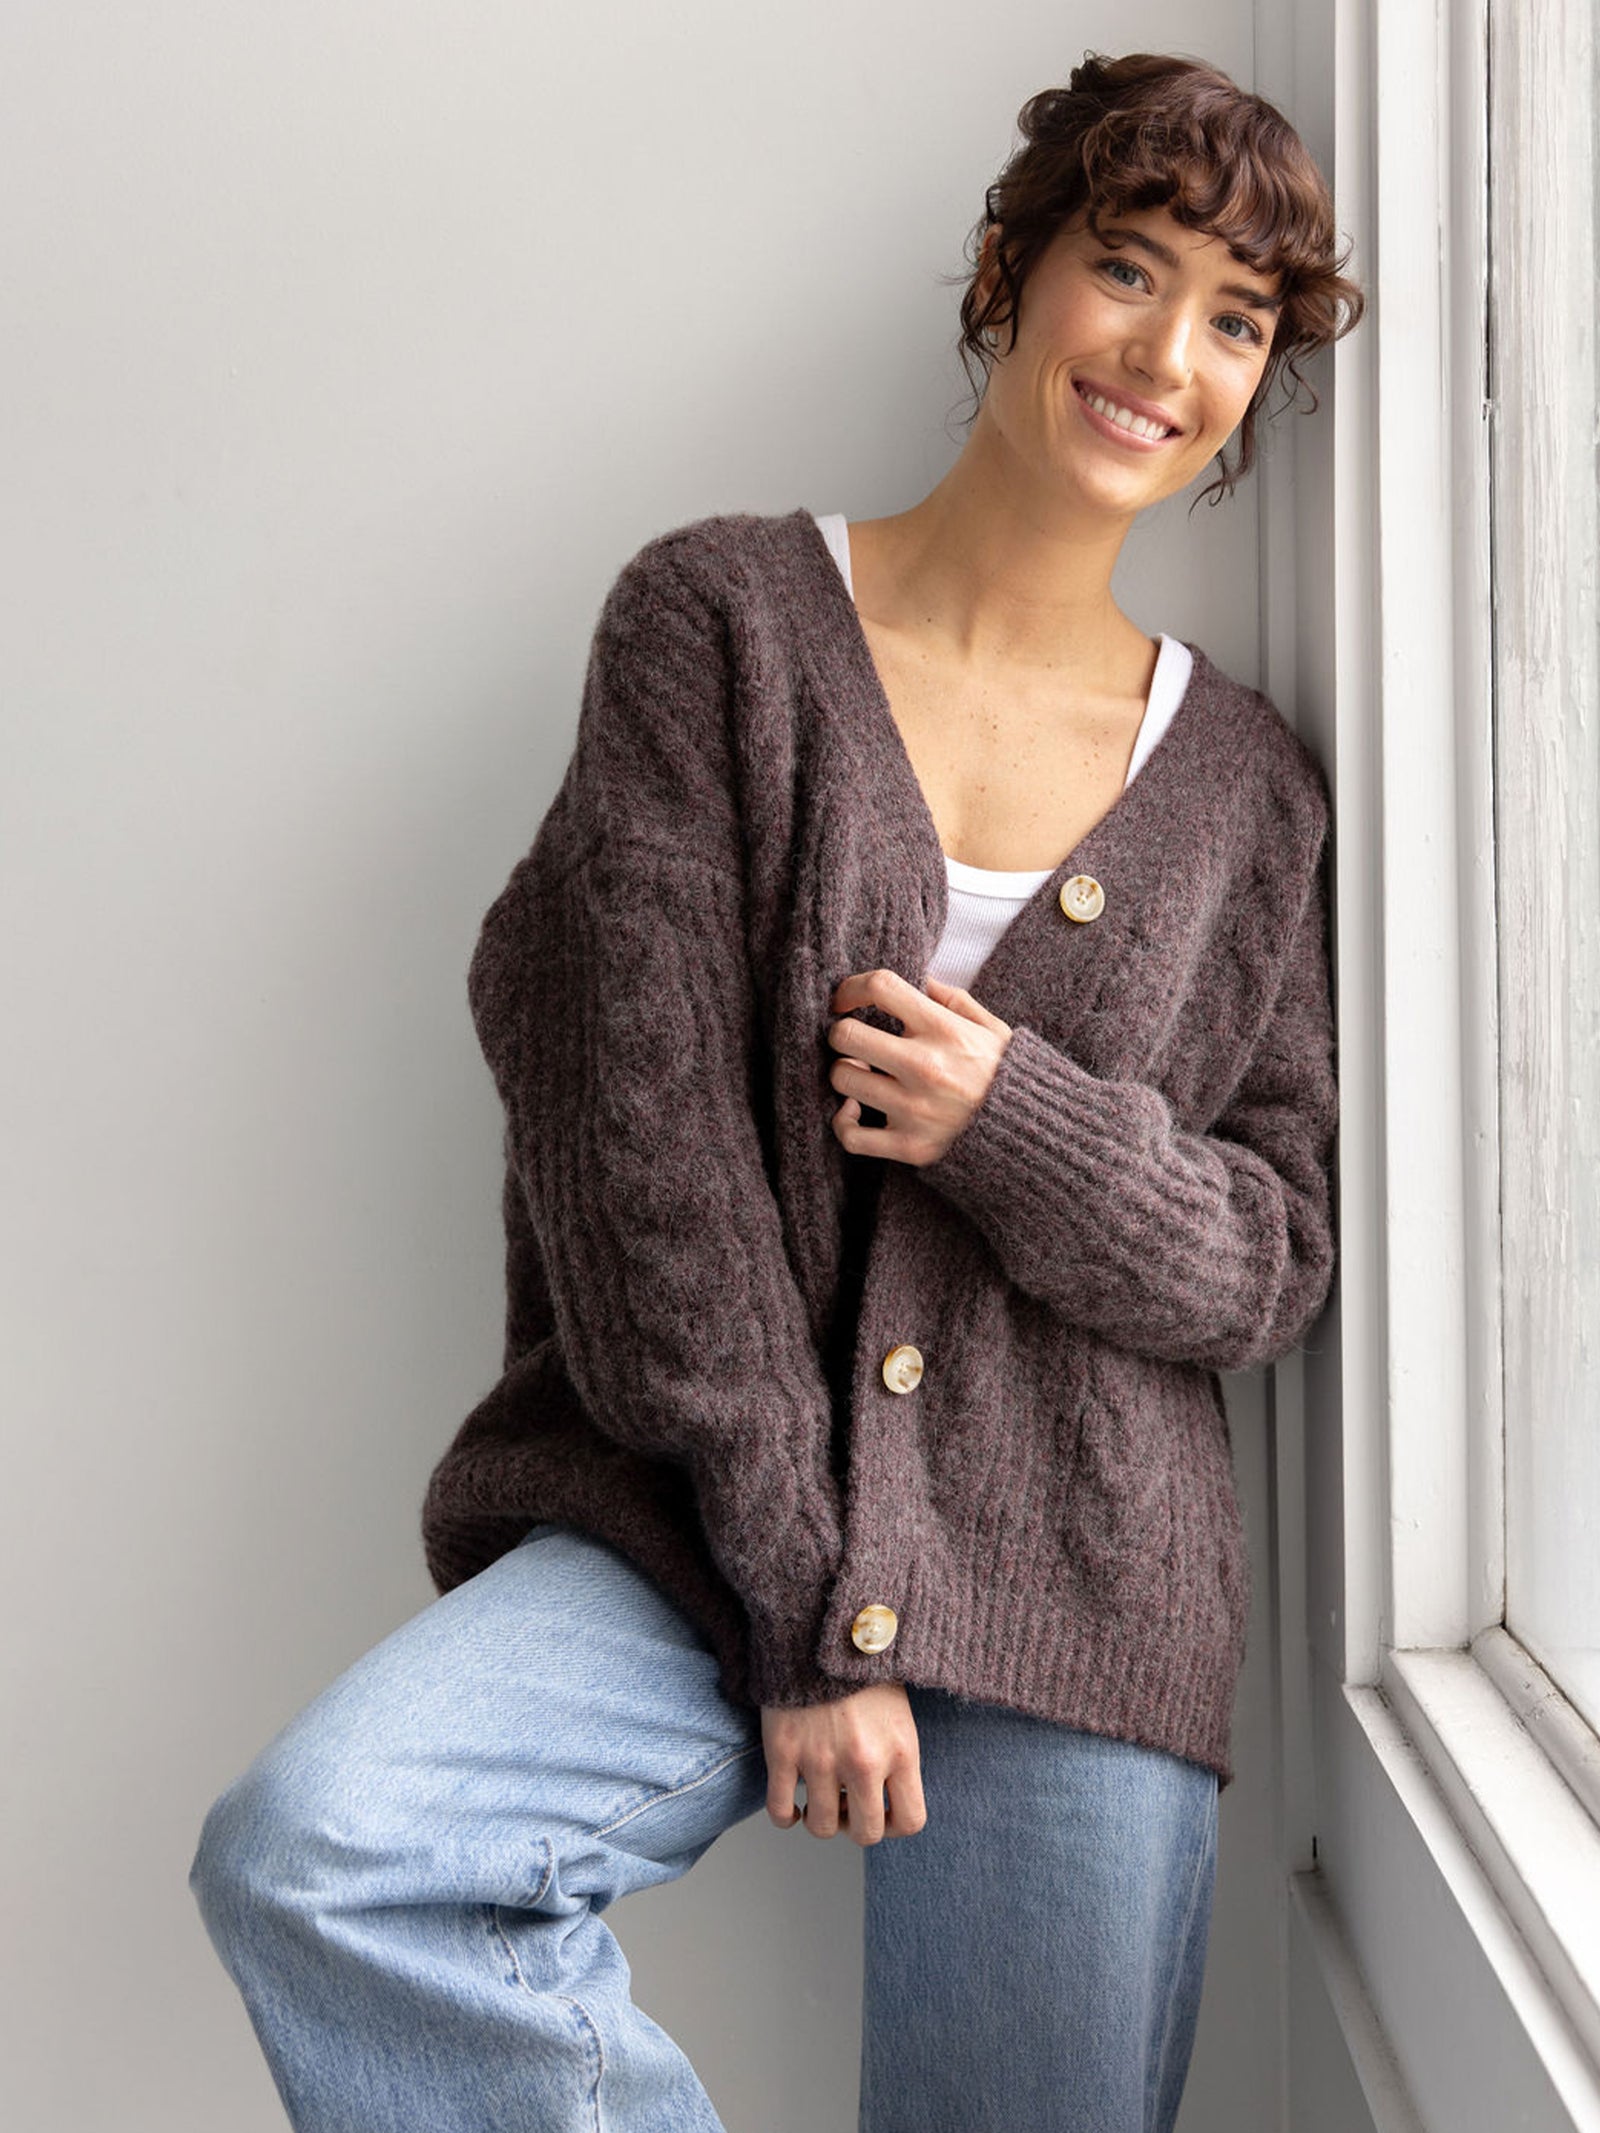 Woman wearing bordeaux cardigan and jeans in front of wall 